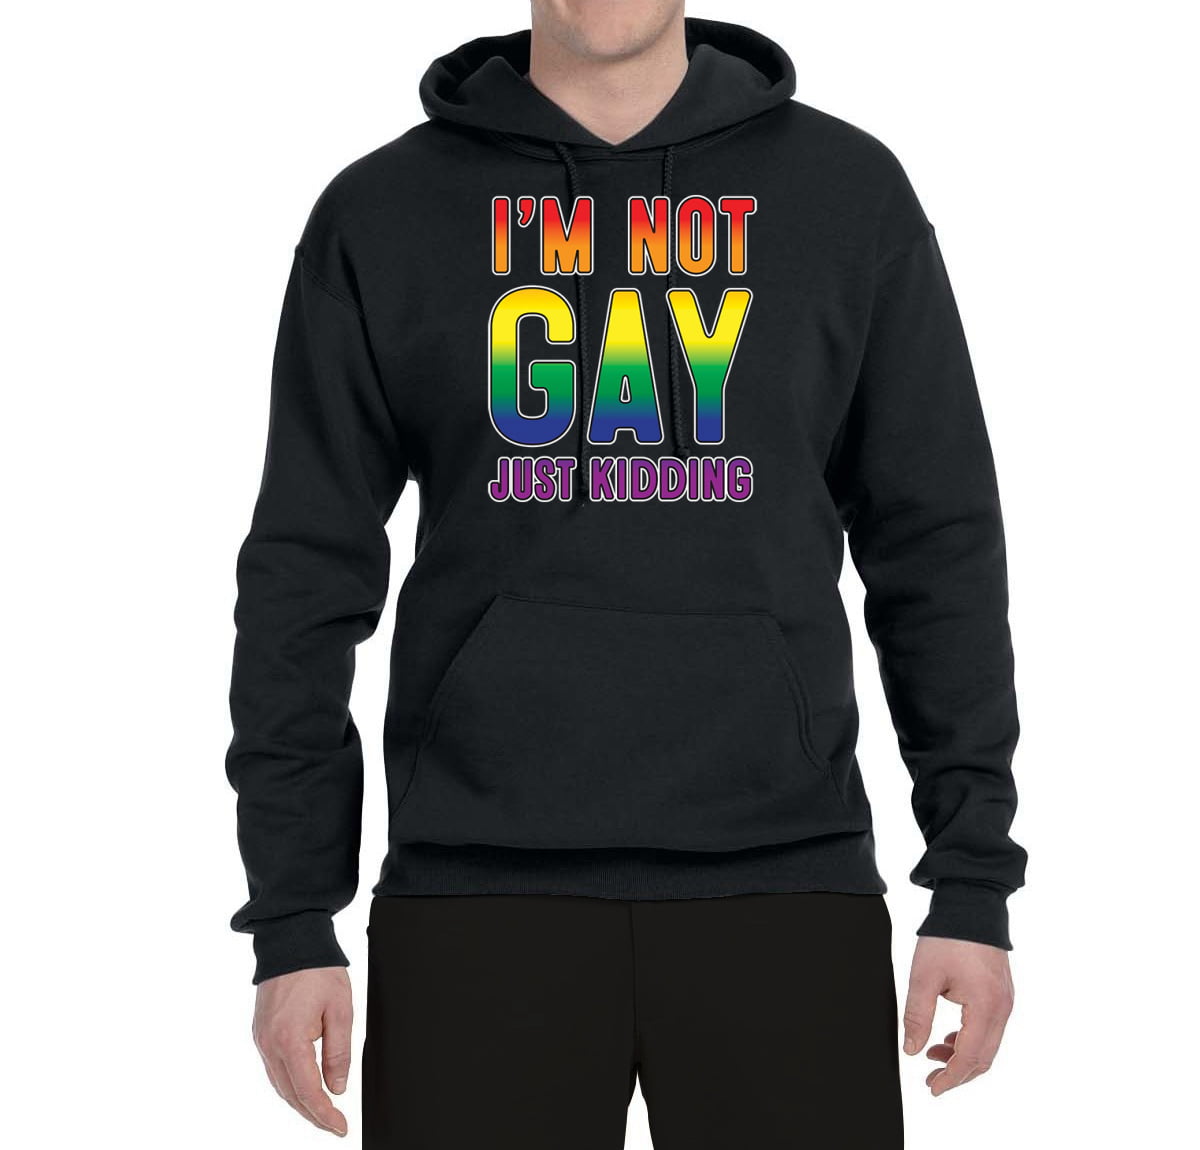 My Children Are Gay Lgbt Funny Rainbow Shirt Pride Equality Christmas Xmas Holiday Rainbow Adults Adult Hoodie Black